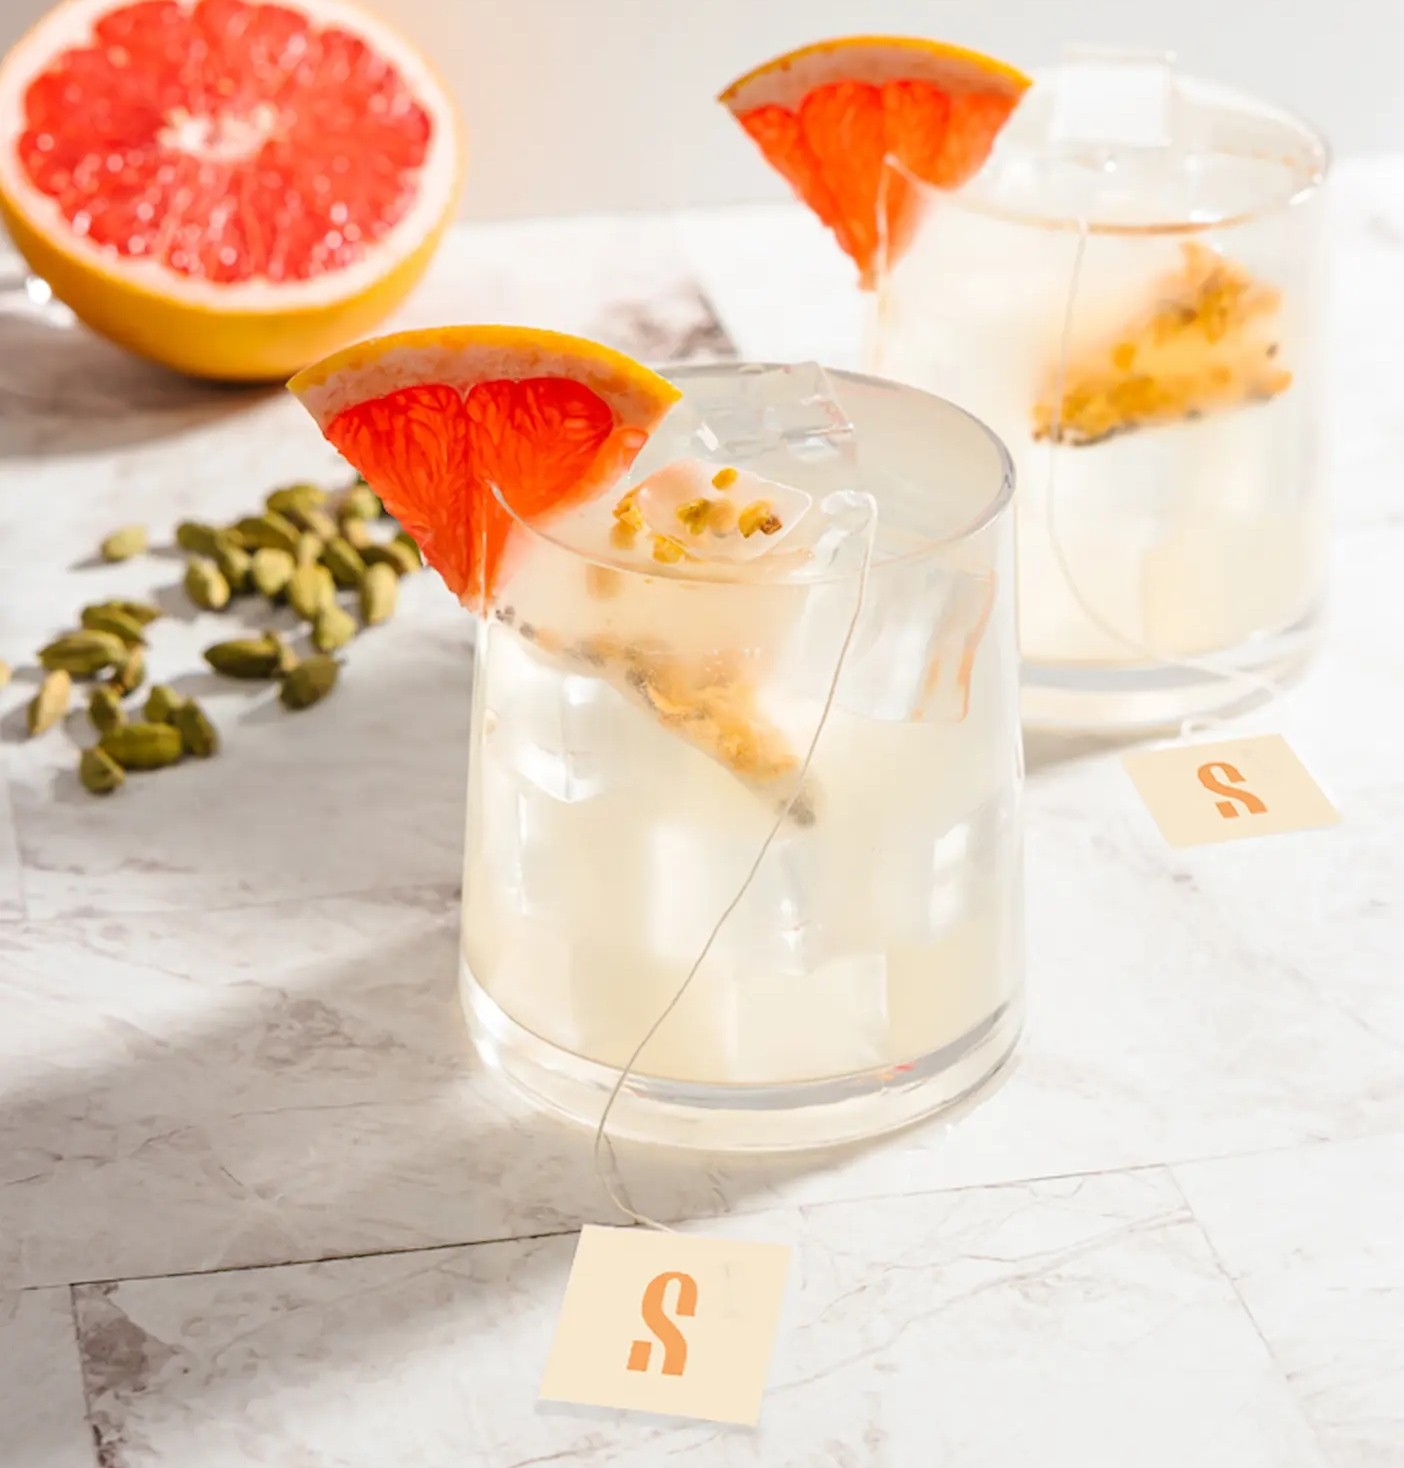 This Dry January, Drink SAYSO, the First-Ever Mocktail Tea Bag